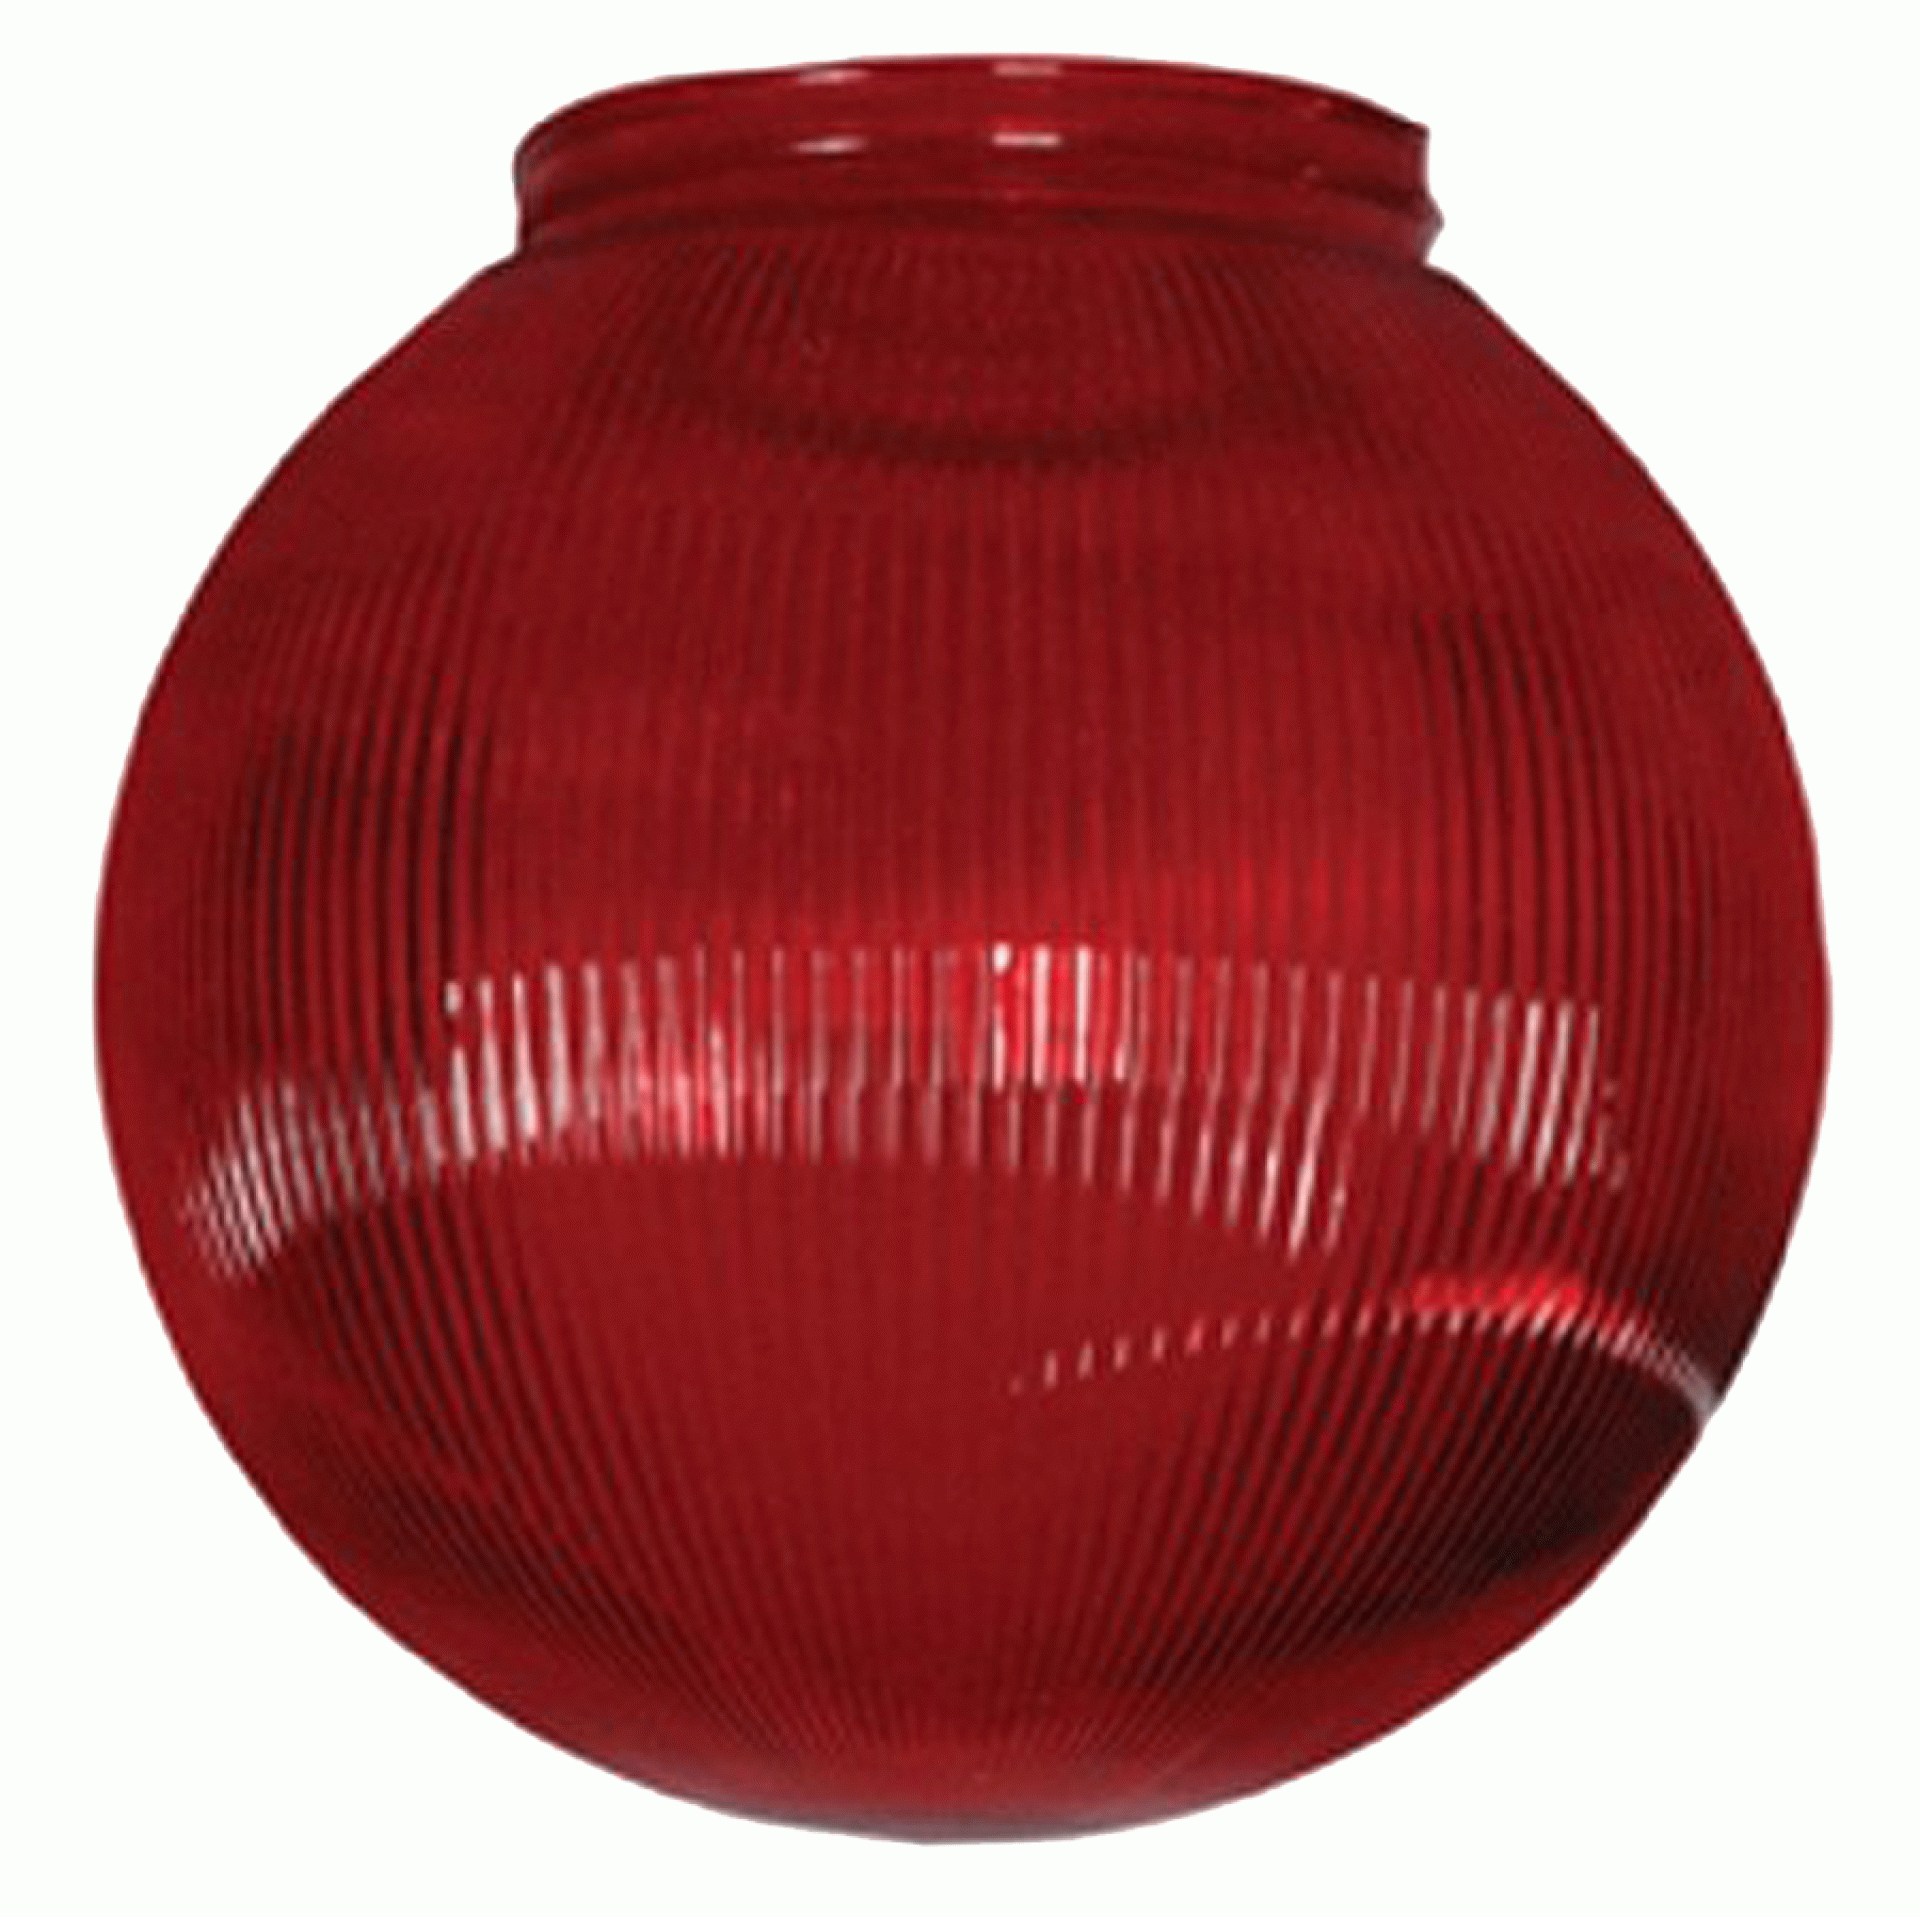 POLYMER PRODUCT LLC. | 3211-51630 | REPLACEMENT GLOBE - RED